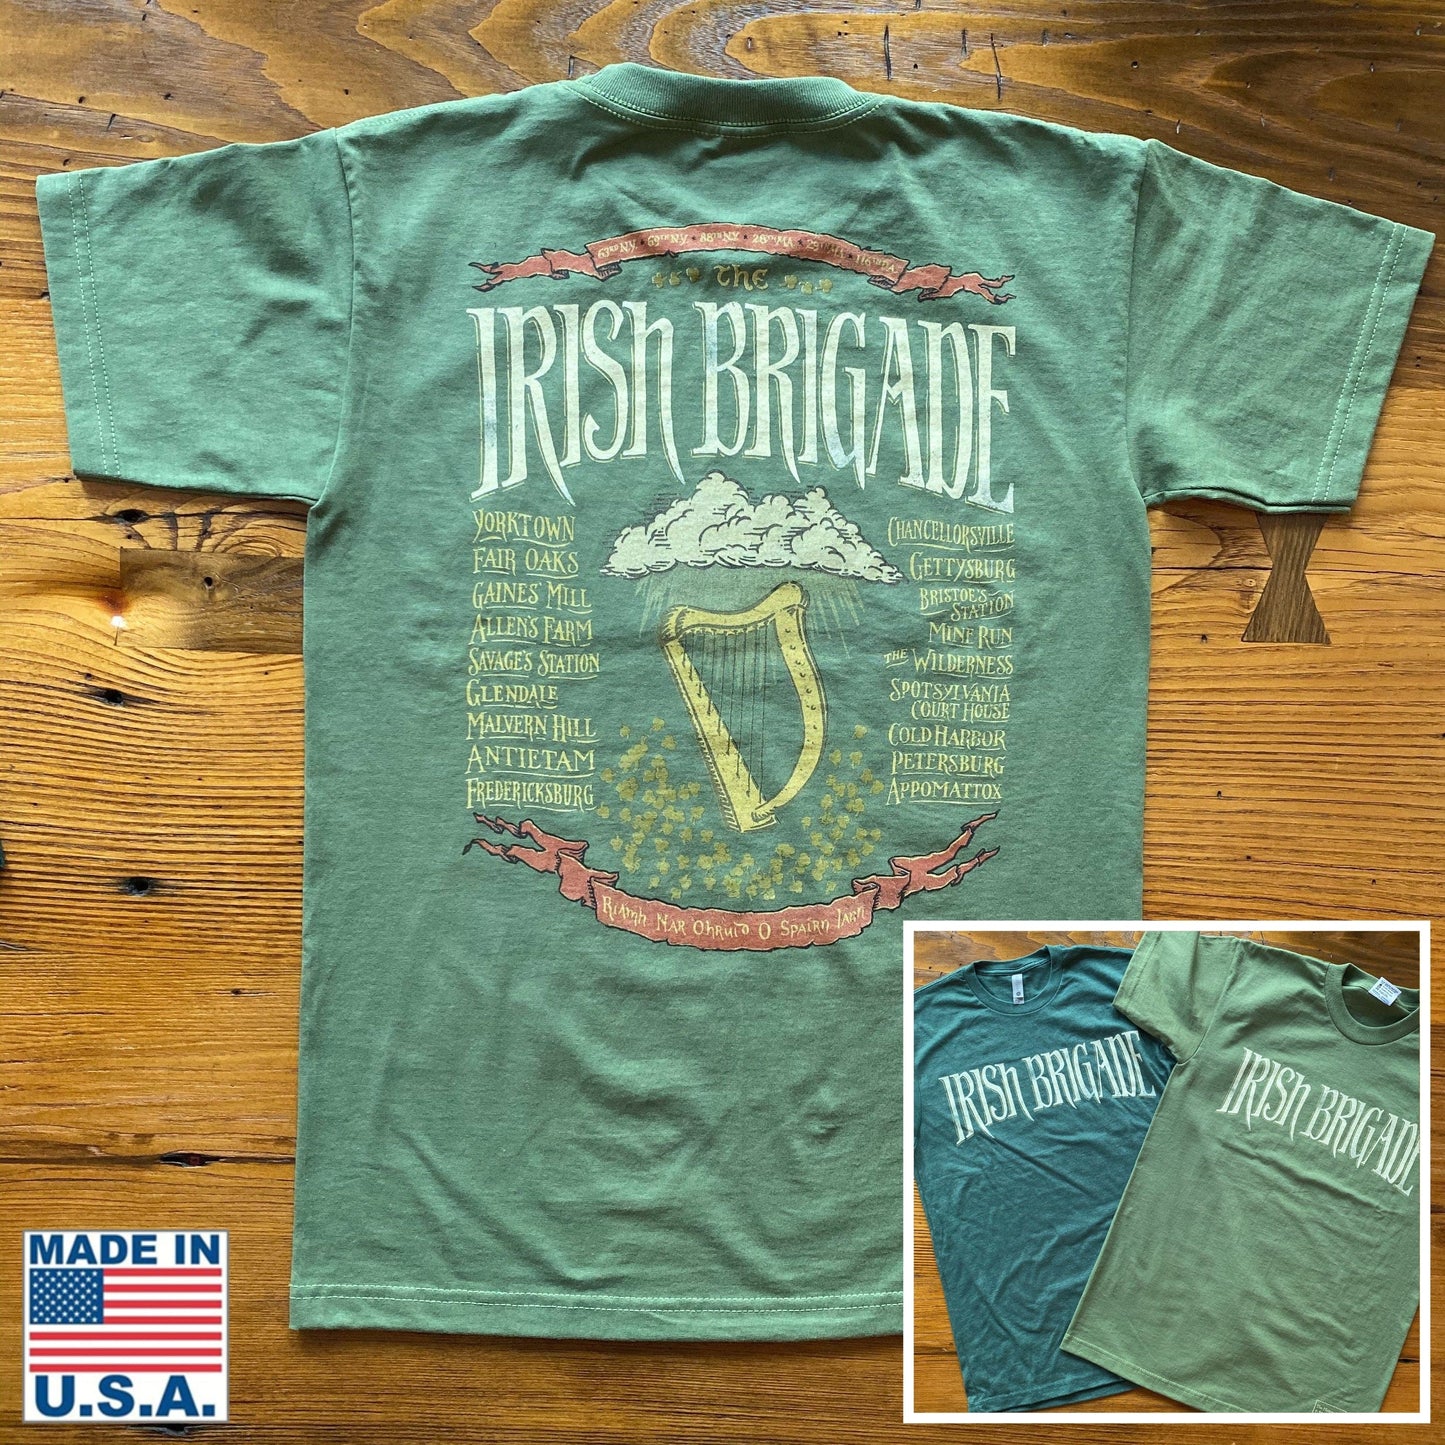 The Civil War "Irish Brigade" Shirt in Army green from The History List store